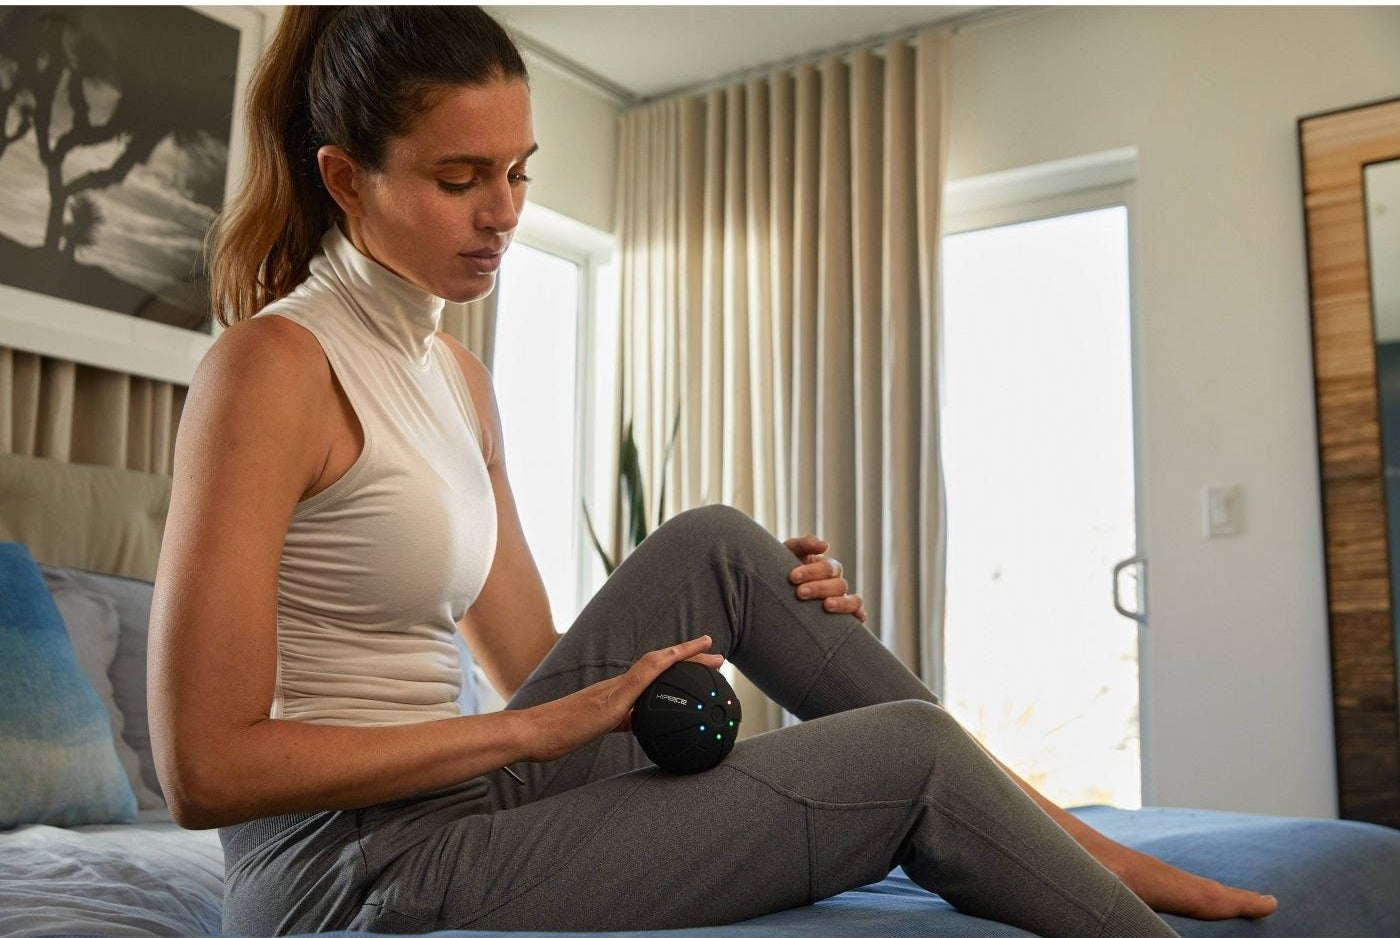 A woman leans on her bed and uses a mini vibrating massage ball on her thigh.